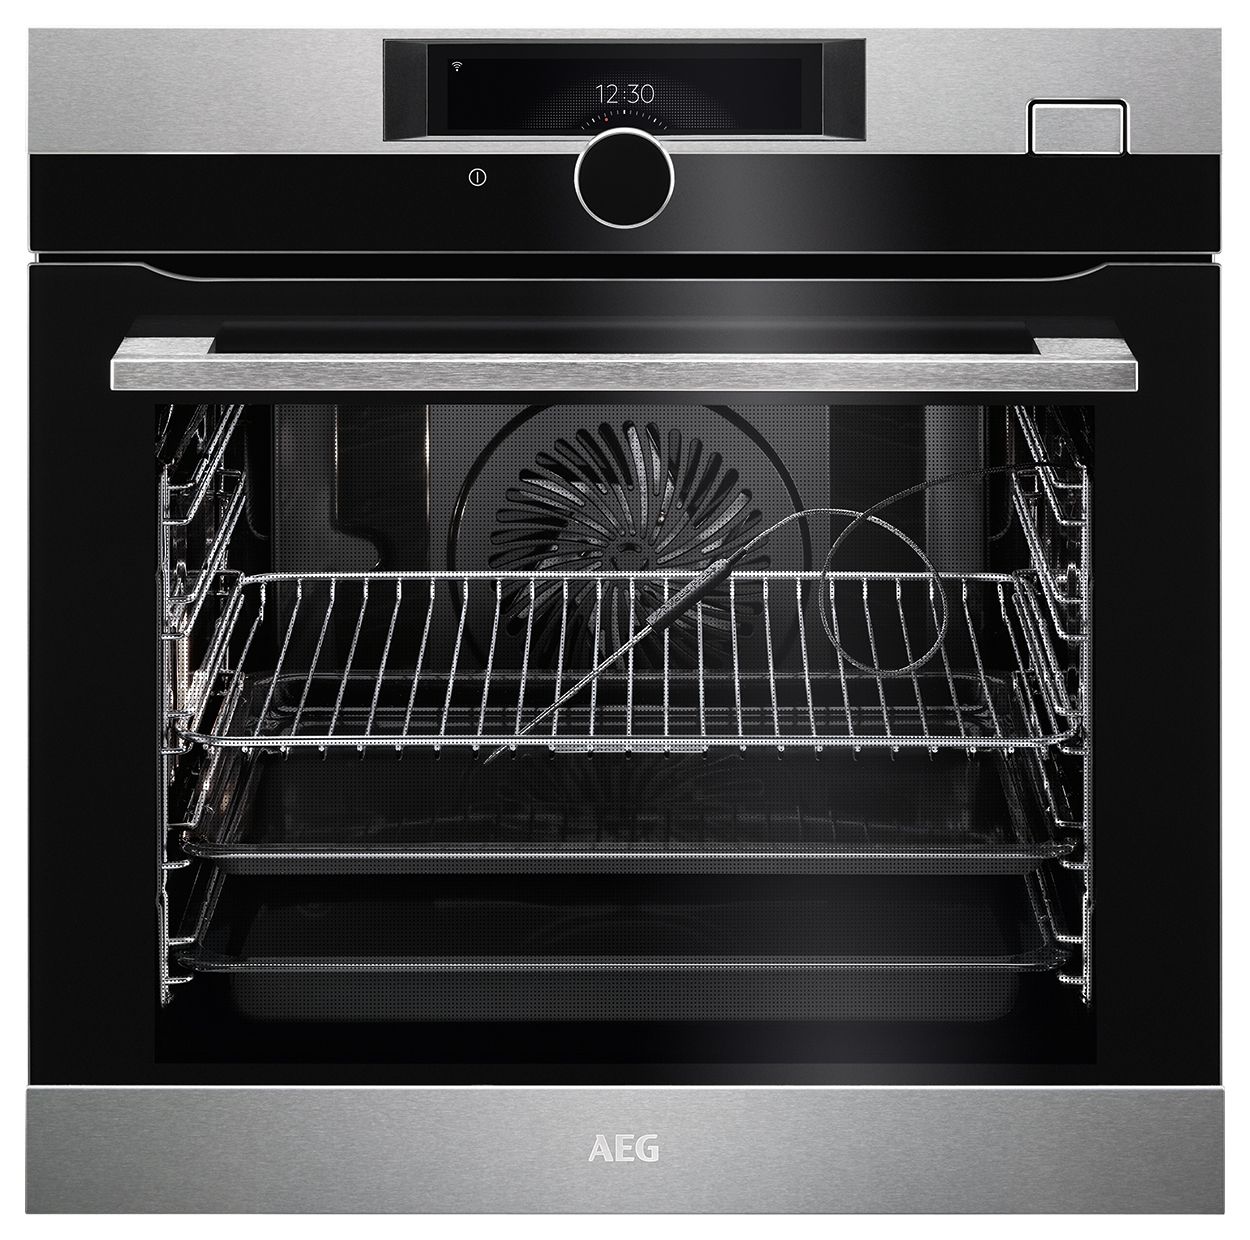 AEG BSK978330M Connected SteamCrisp Oven - Stainless Steel